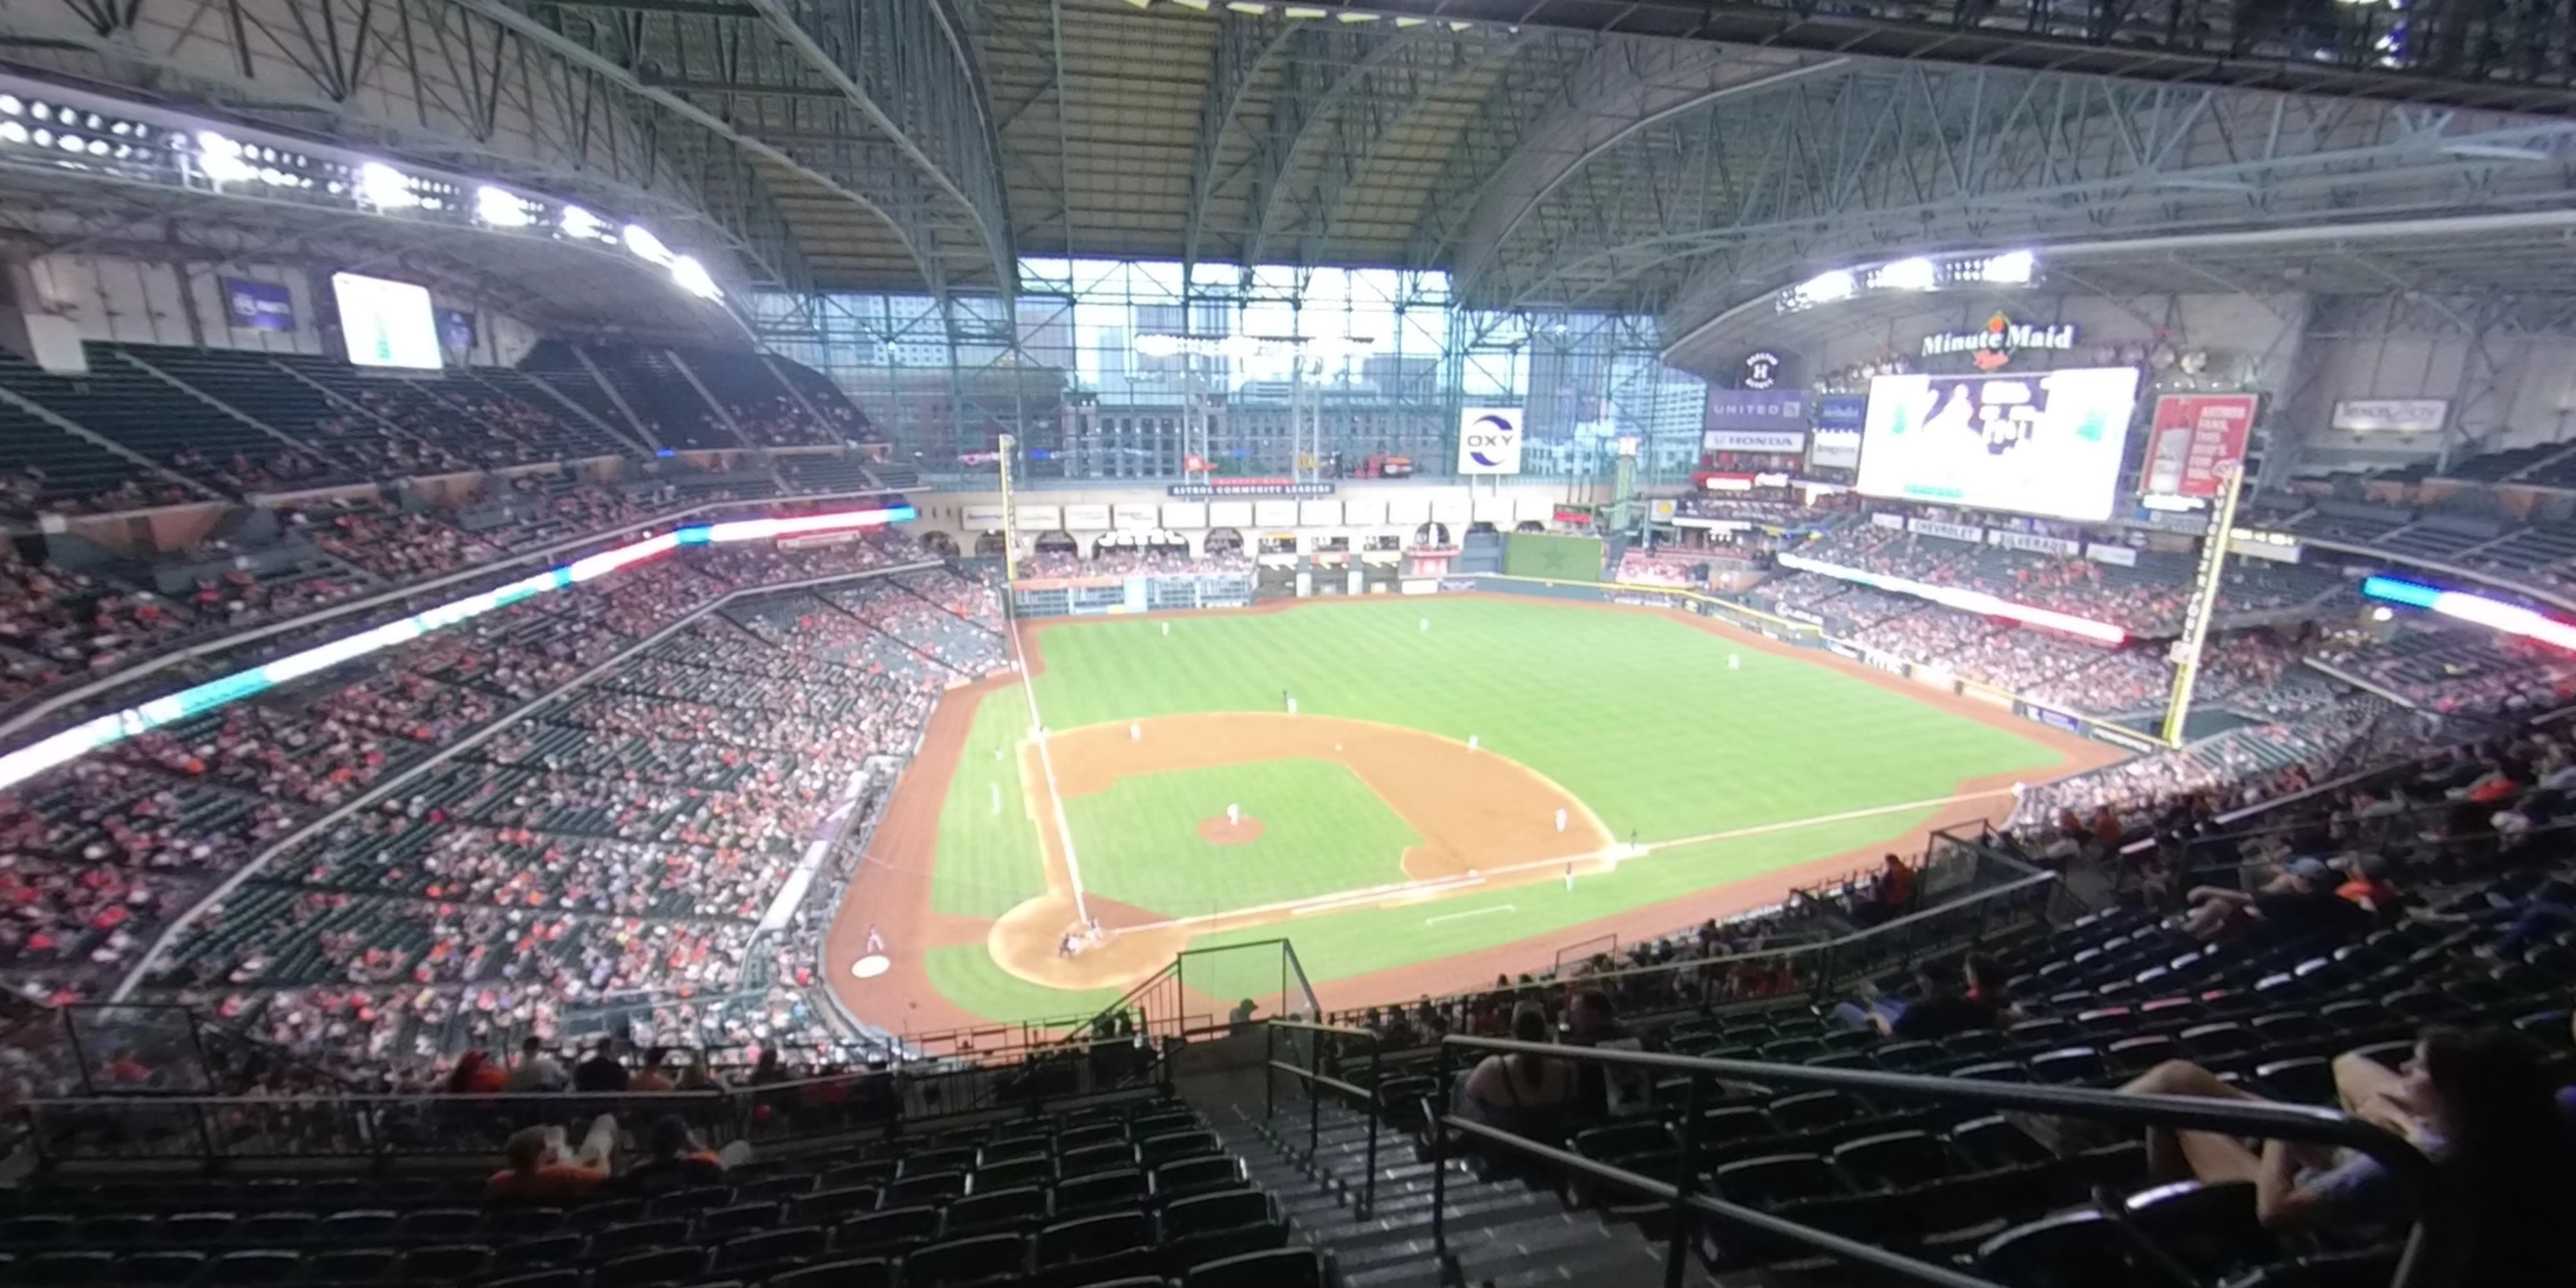 section 422 panoramic seat view  for baseball - minute maid park